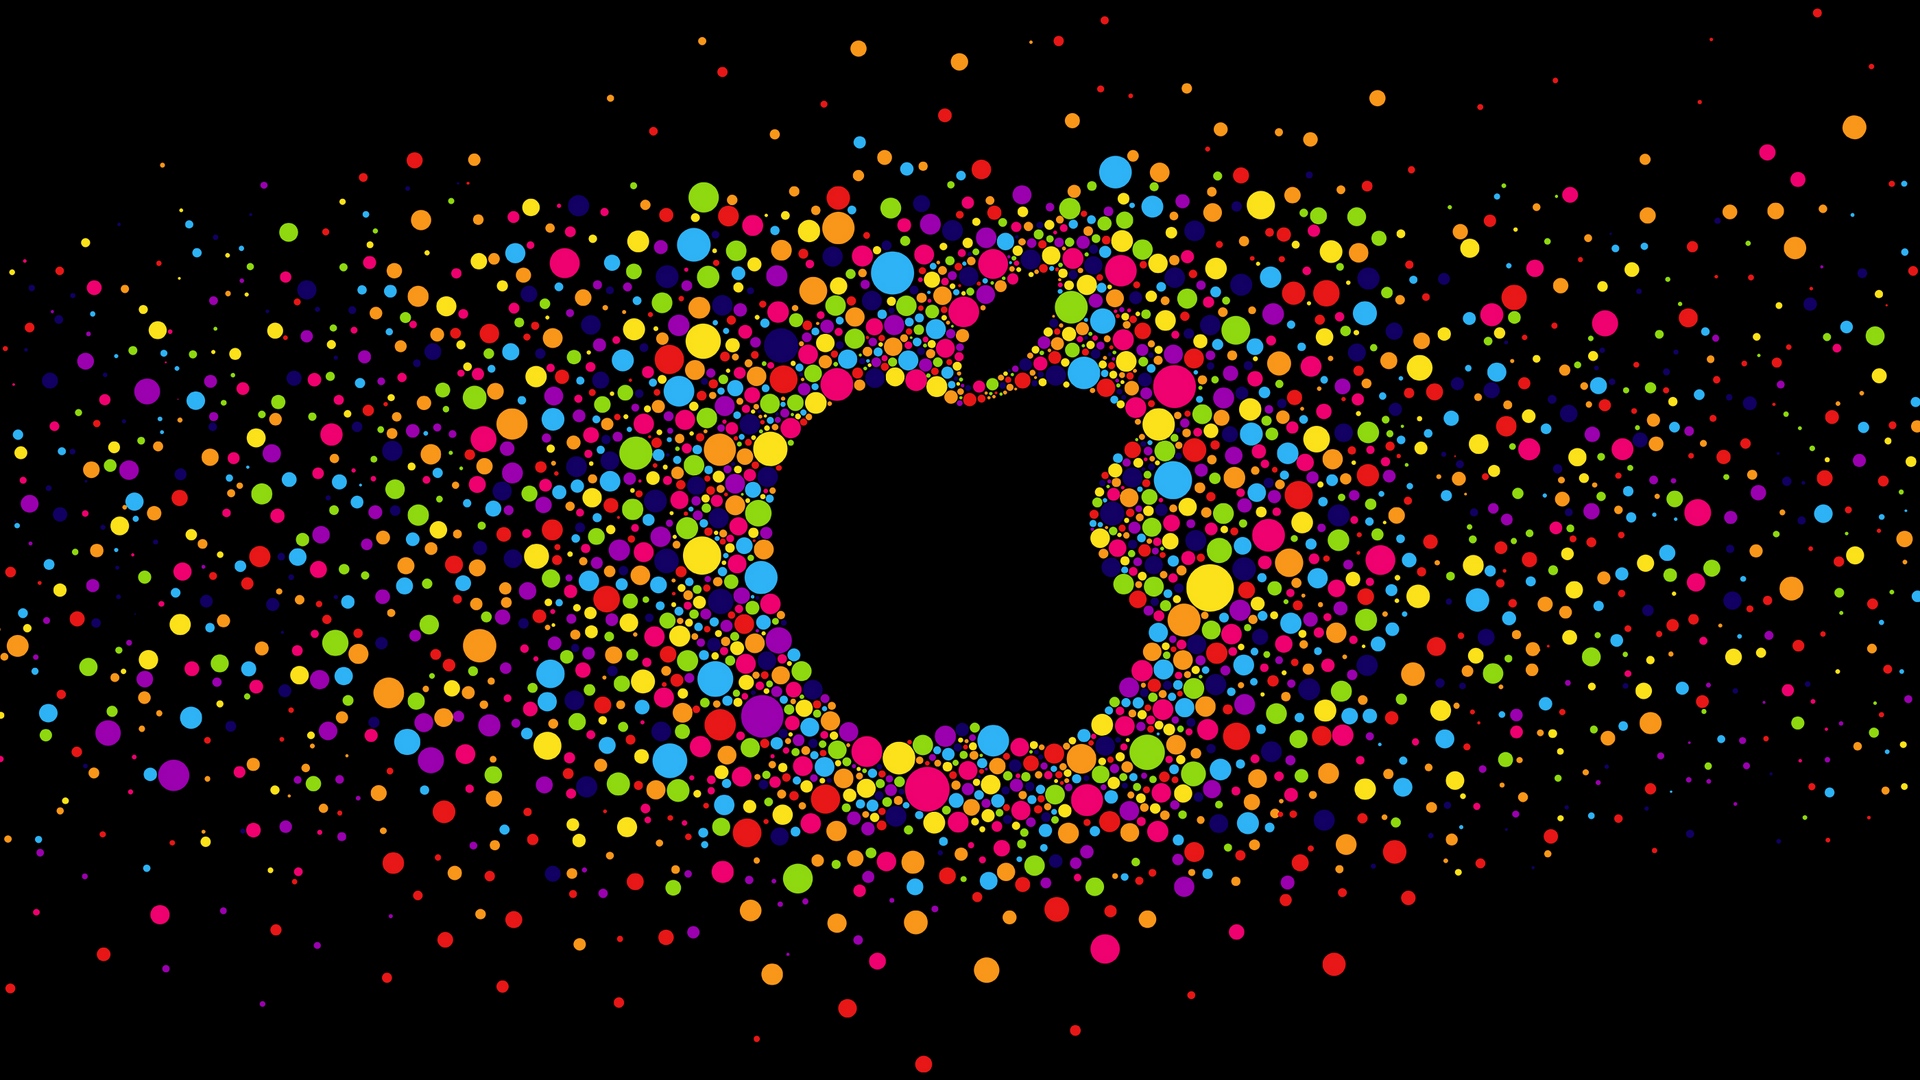 Colorful Circles With Black Background And Apple Logo - Iphone Wallpaper Apple Logo - HD Wallpaper 